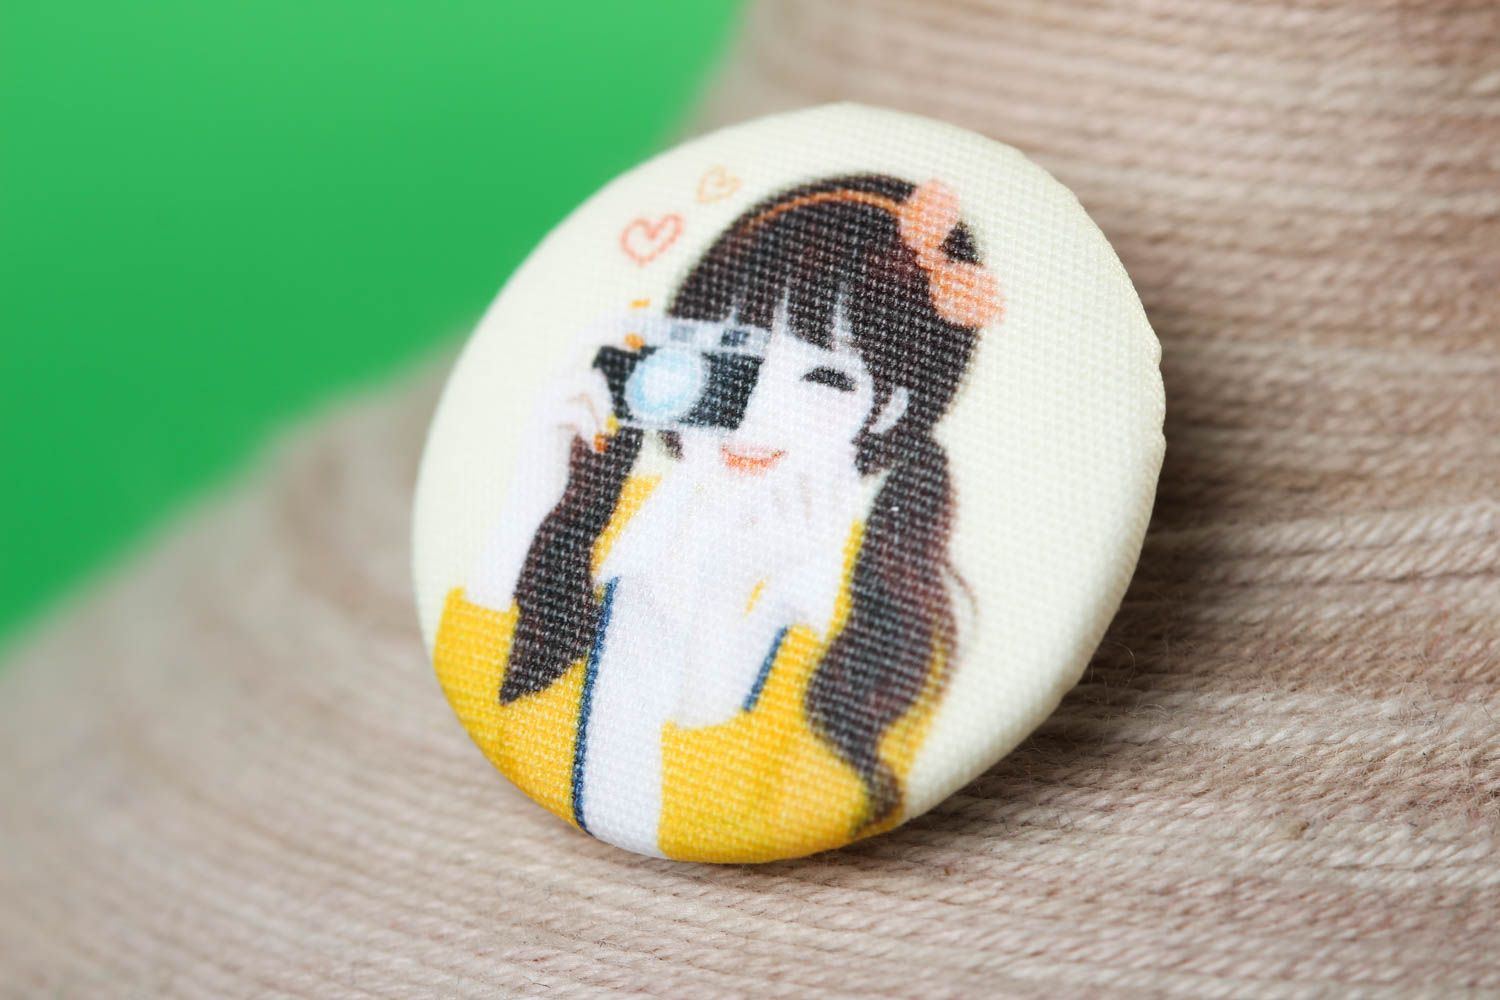 Cute handmade plastic button beautiful fabric button with print sewing ideas photo 1